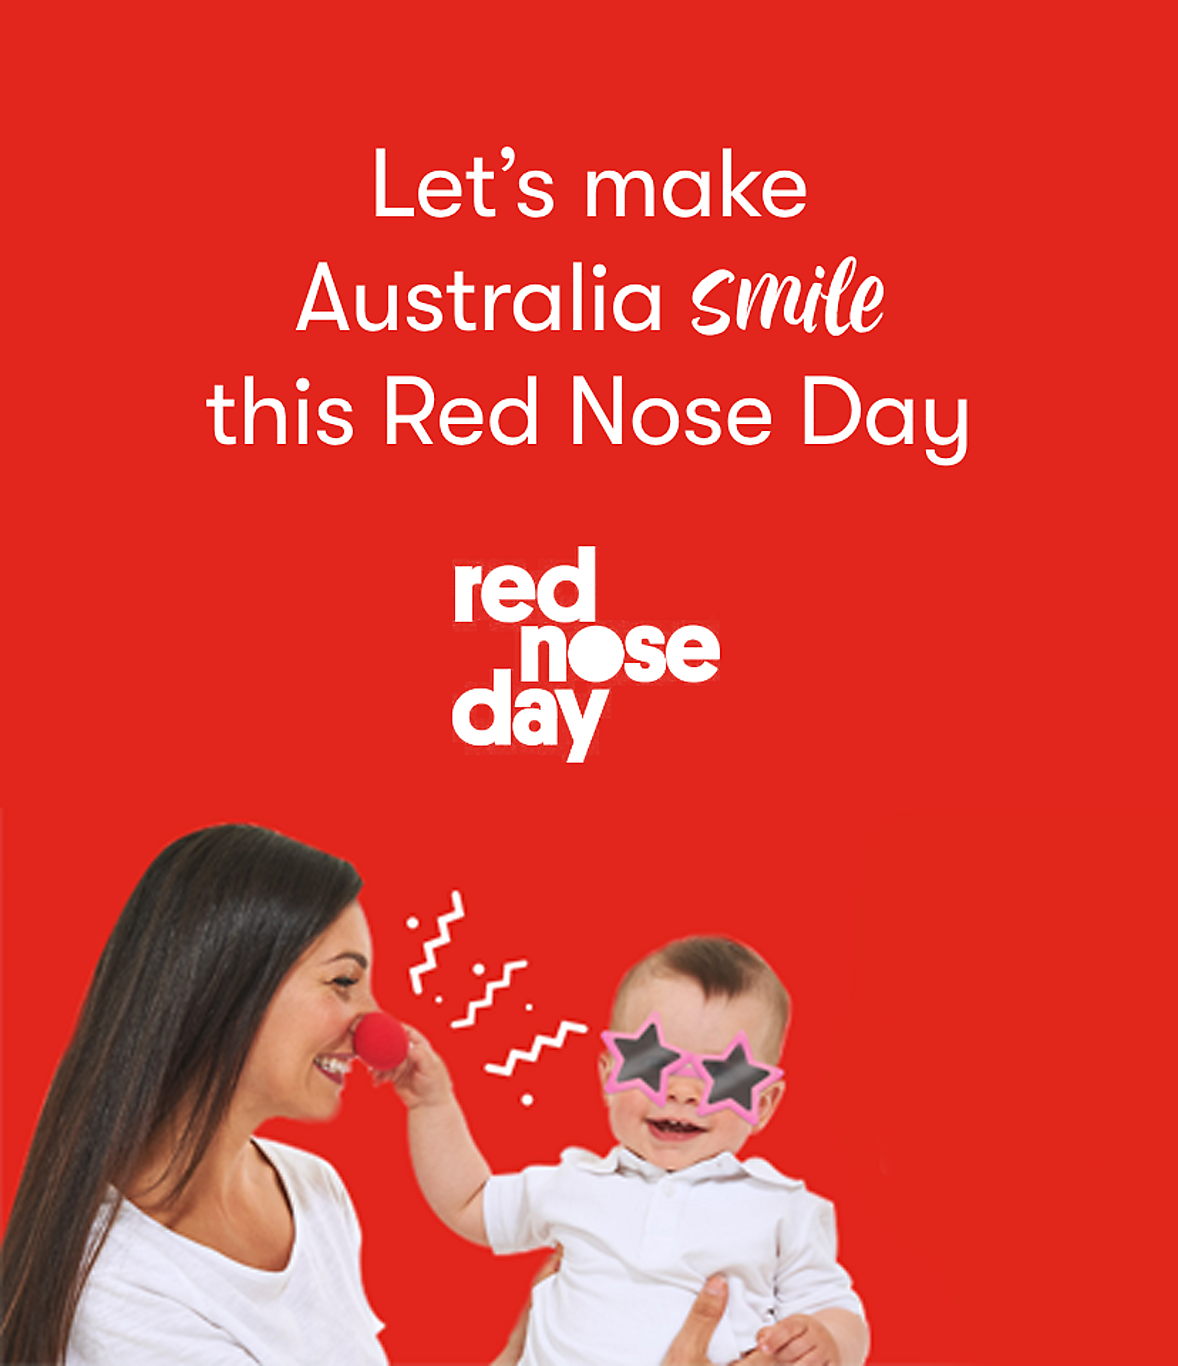 Support Red Nose Day